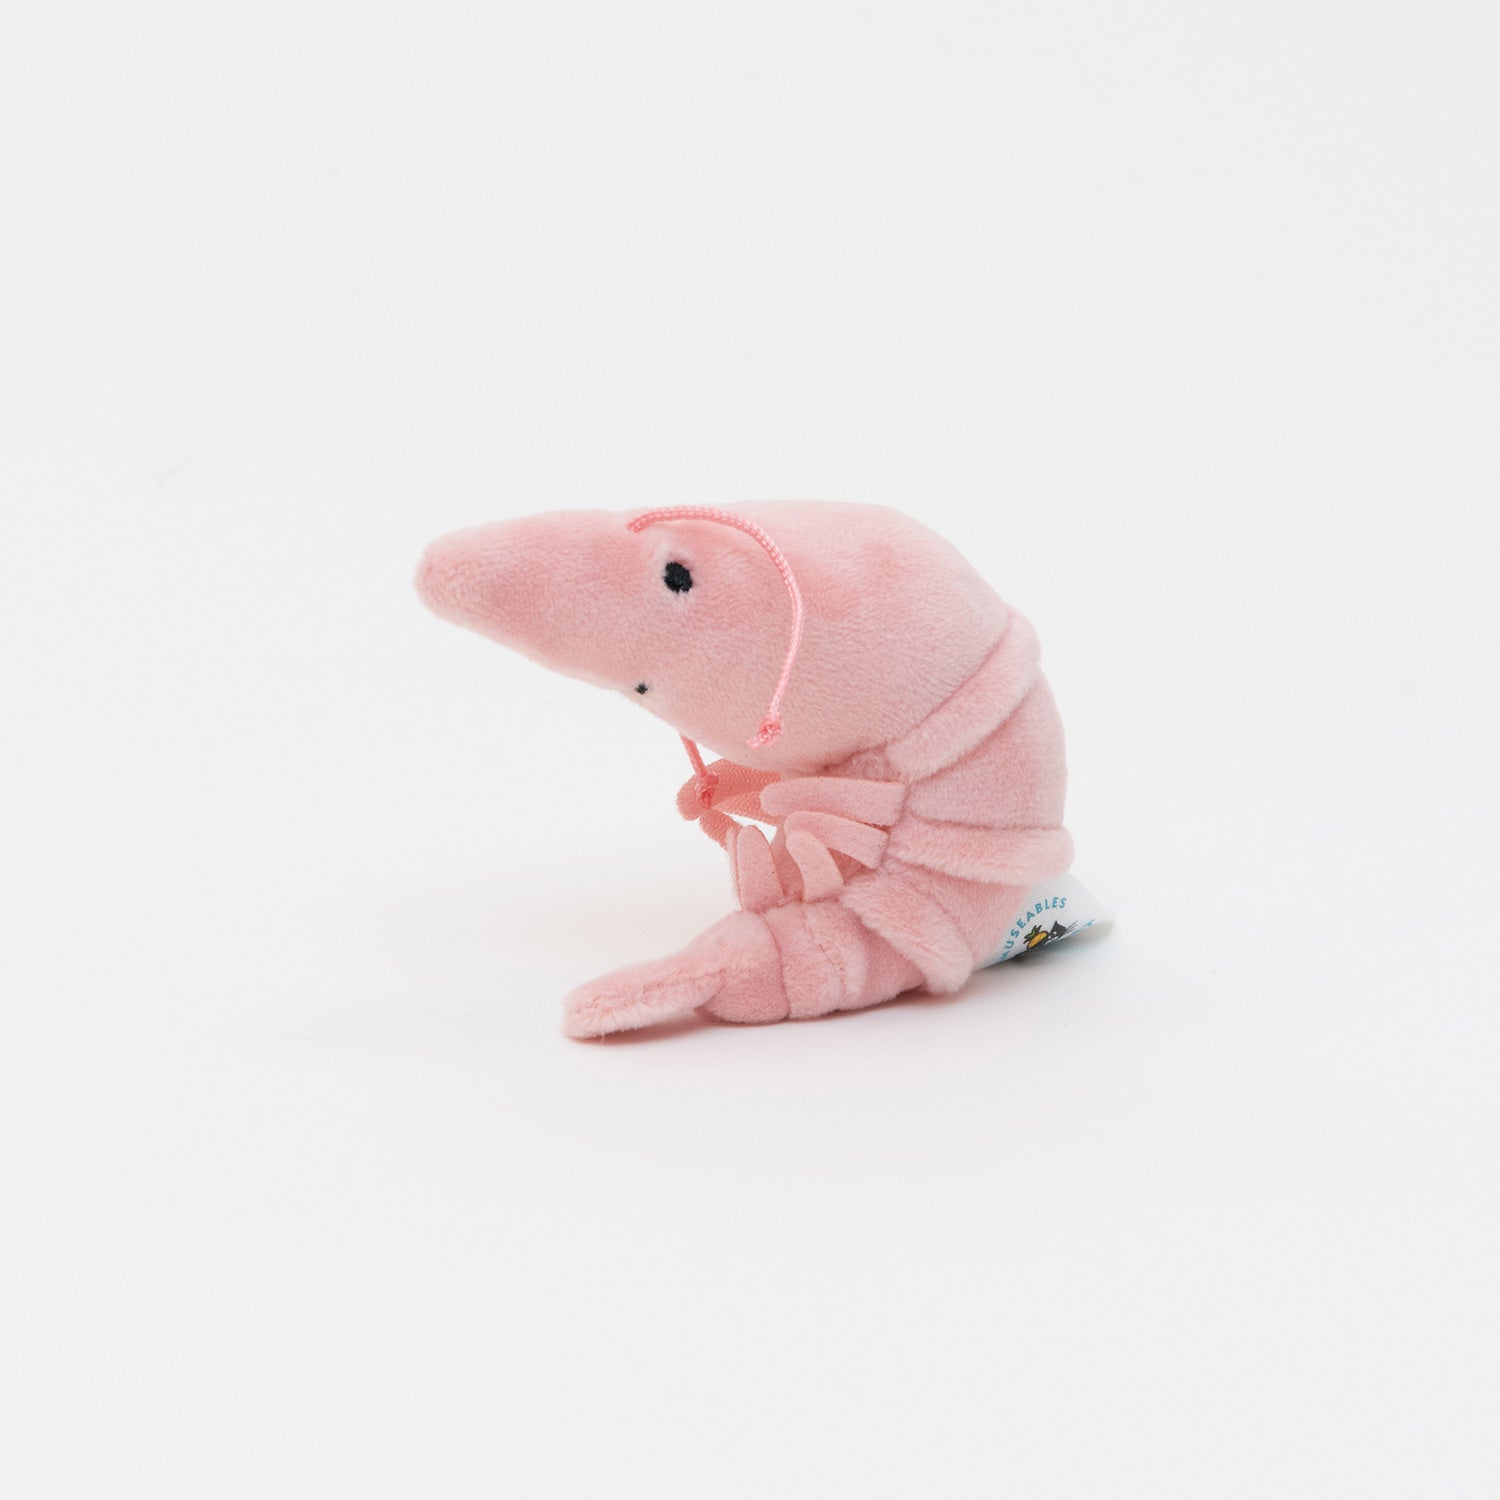 Jellycat Sensational Seafood Shrimp. Tiny Pink Plushie shrimp friend. With tiny legs and antenna and a friendly face.